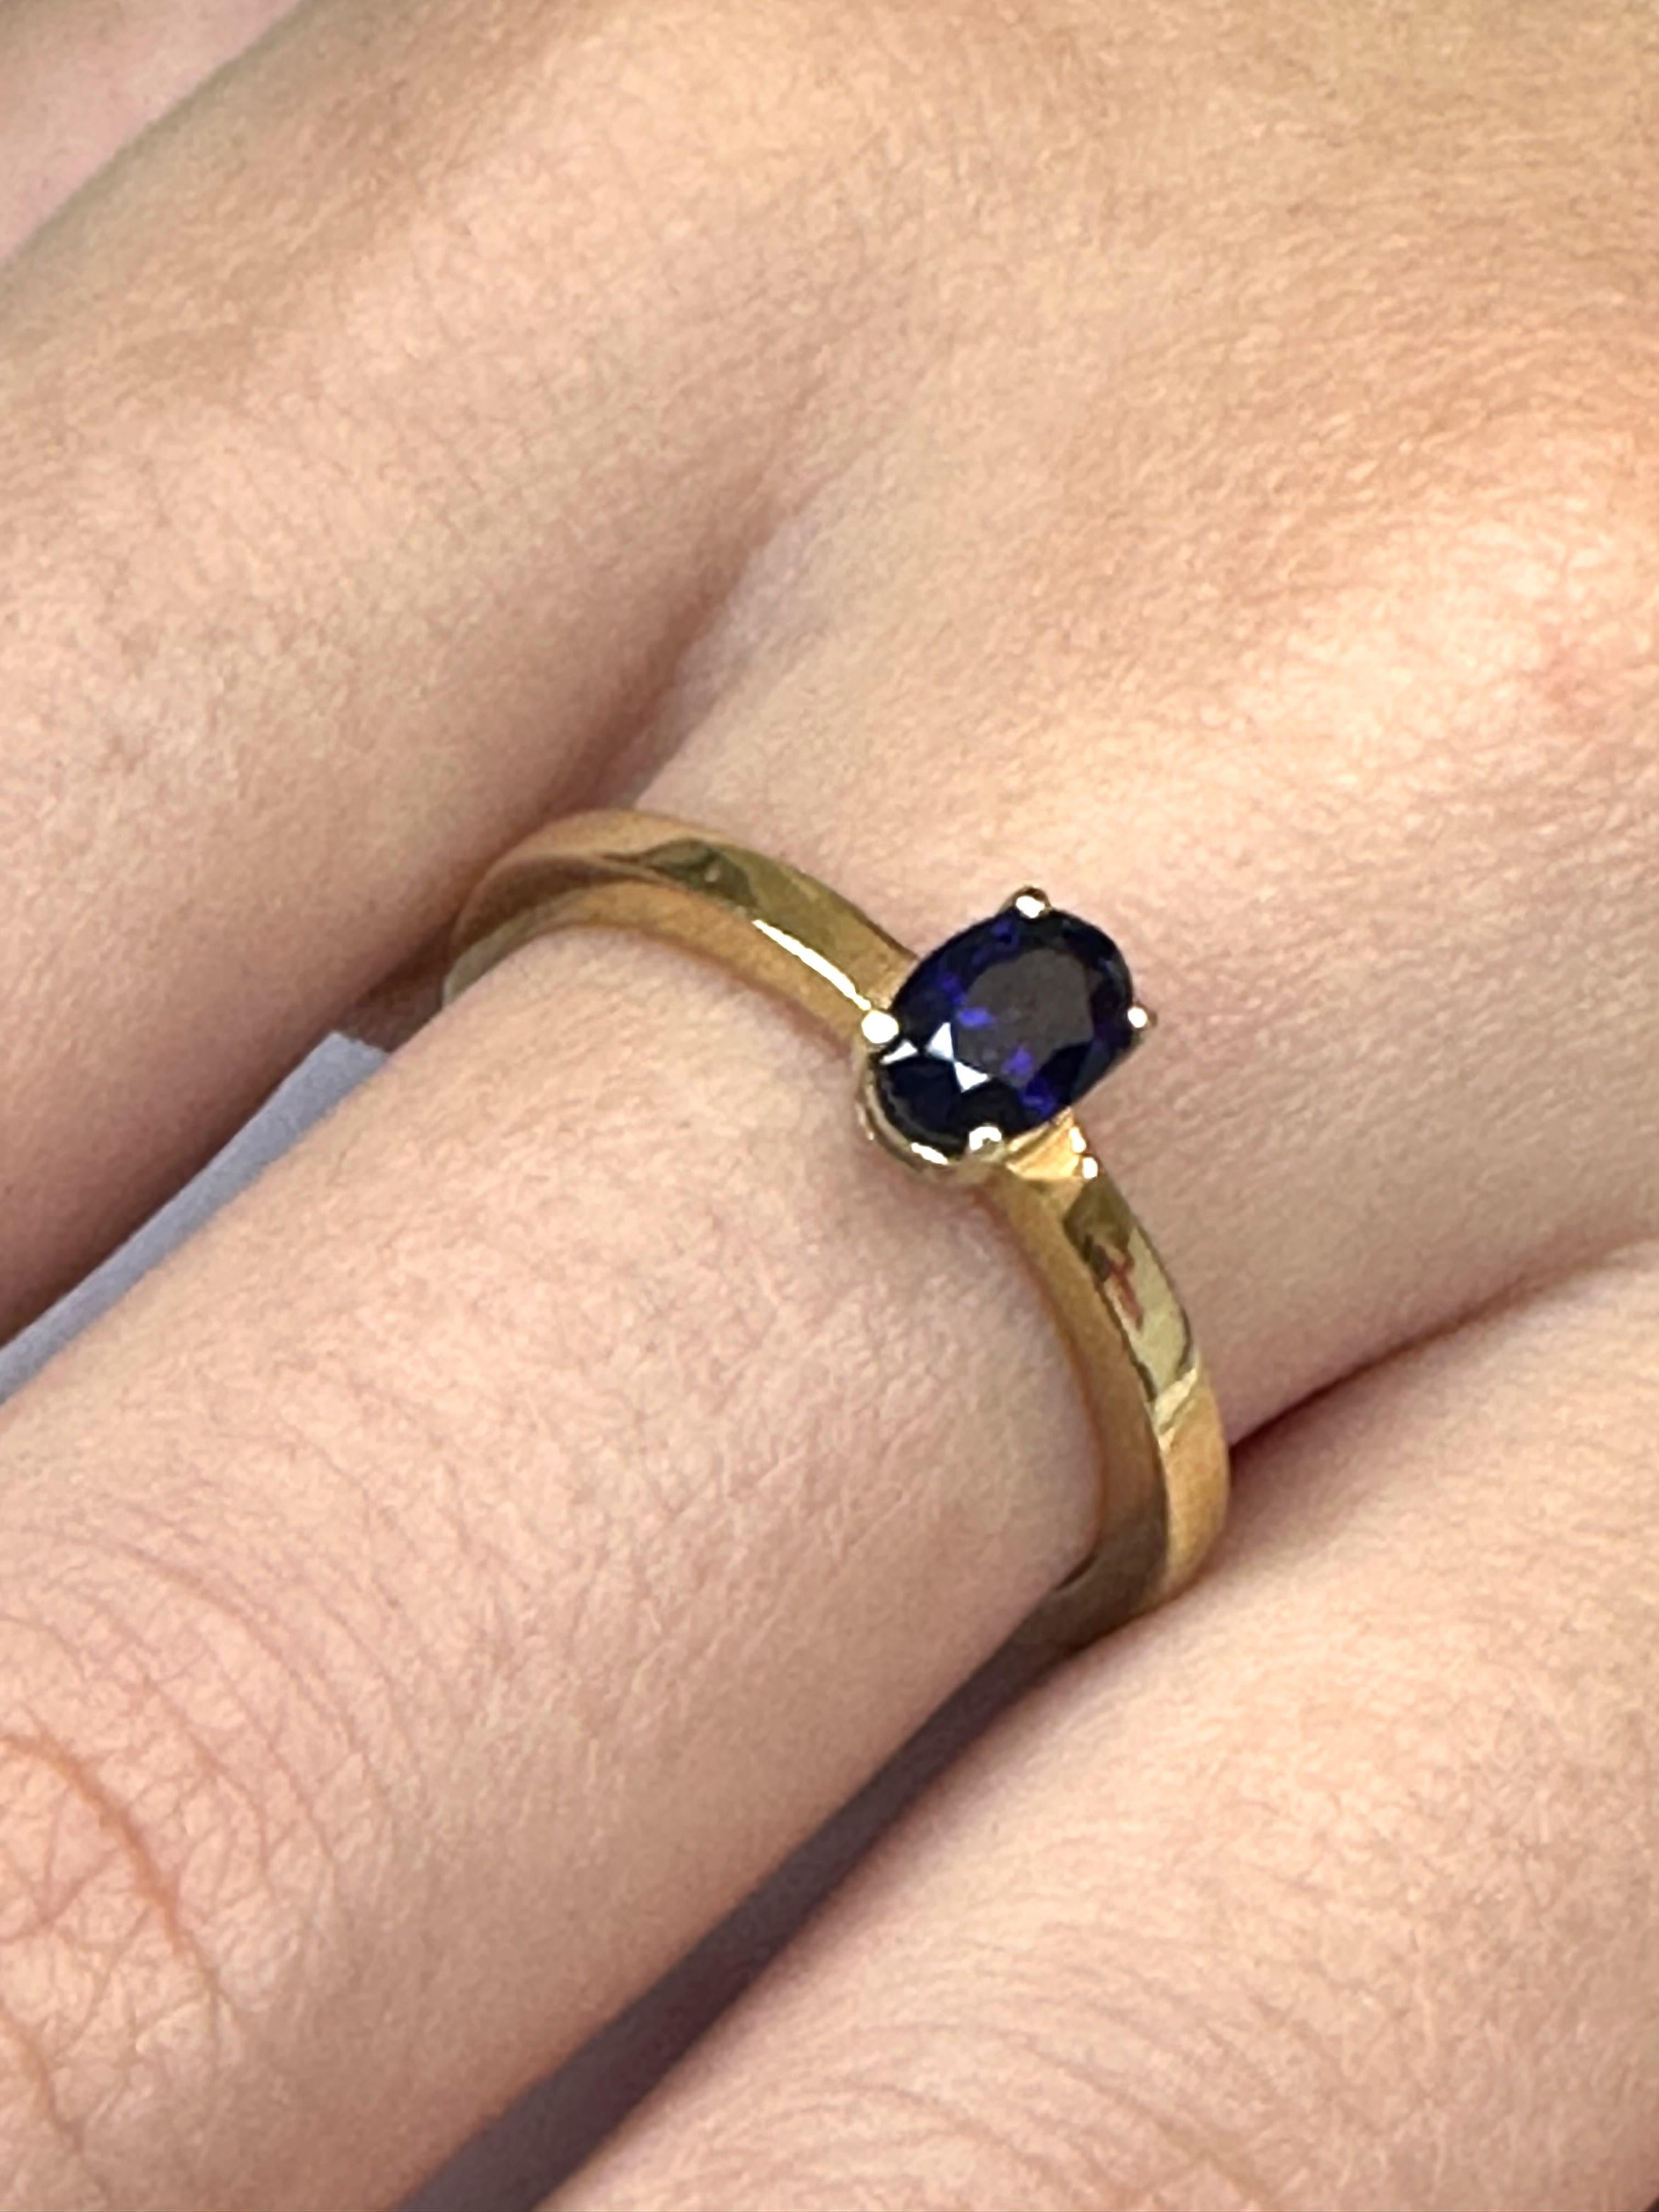 Eliania Rosetti's studio in São Paulo/Brazil designed this elegant solitaire and engagement ring in 3D programming.
Its main stone is an oval sapphire measuring 4 x 6 mm and weighing 0.58 carats.
The height of the stone gives elegance to the